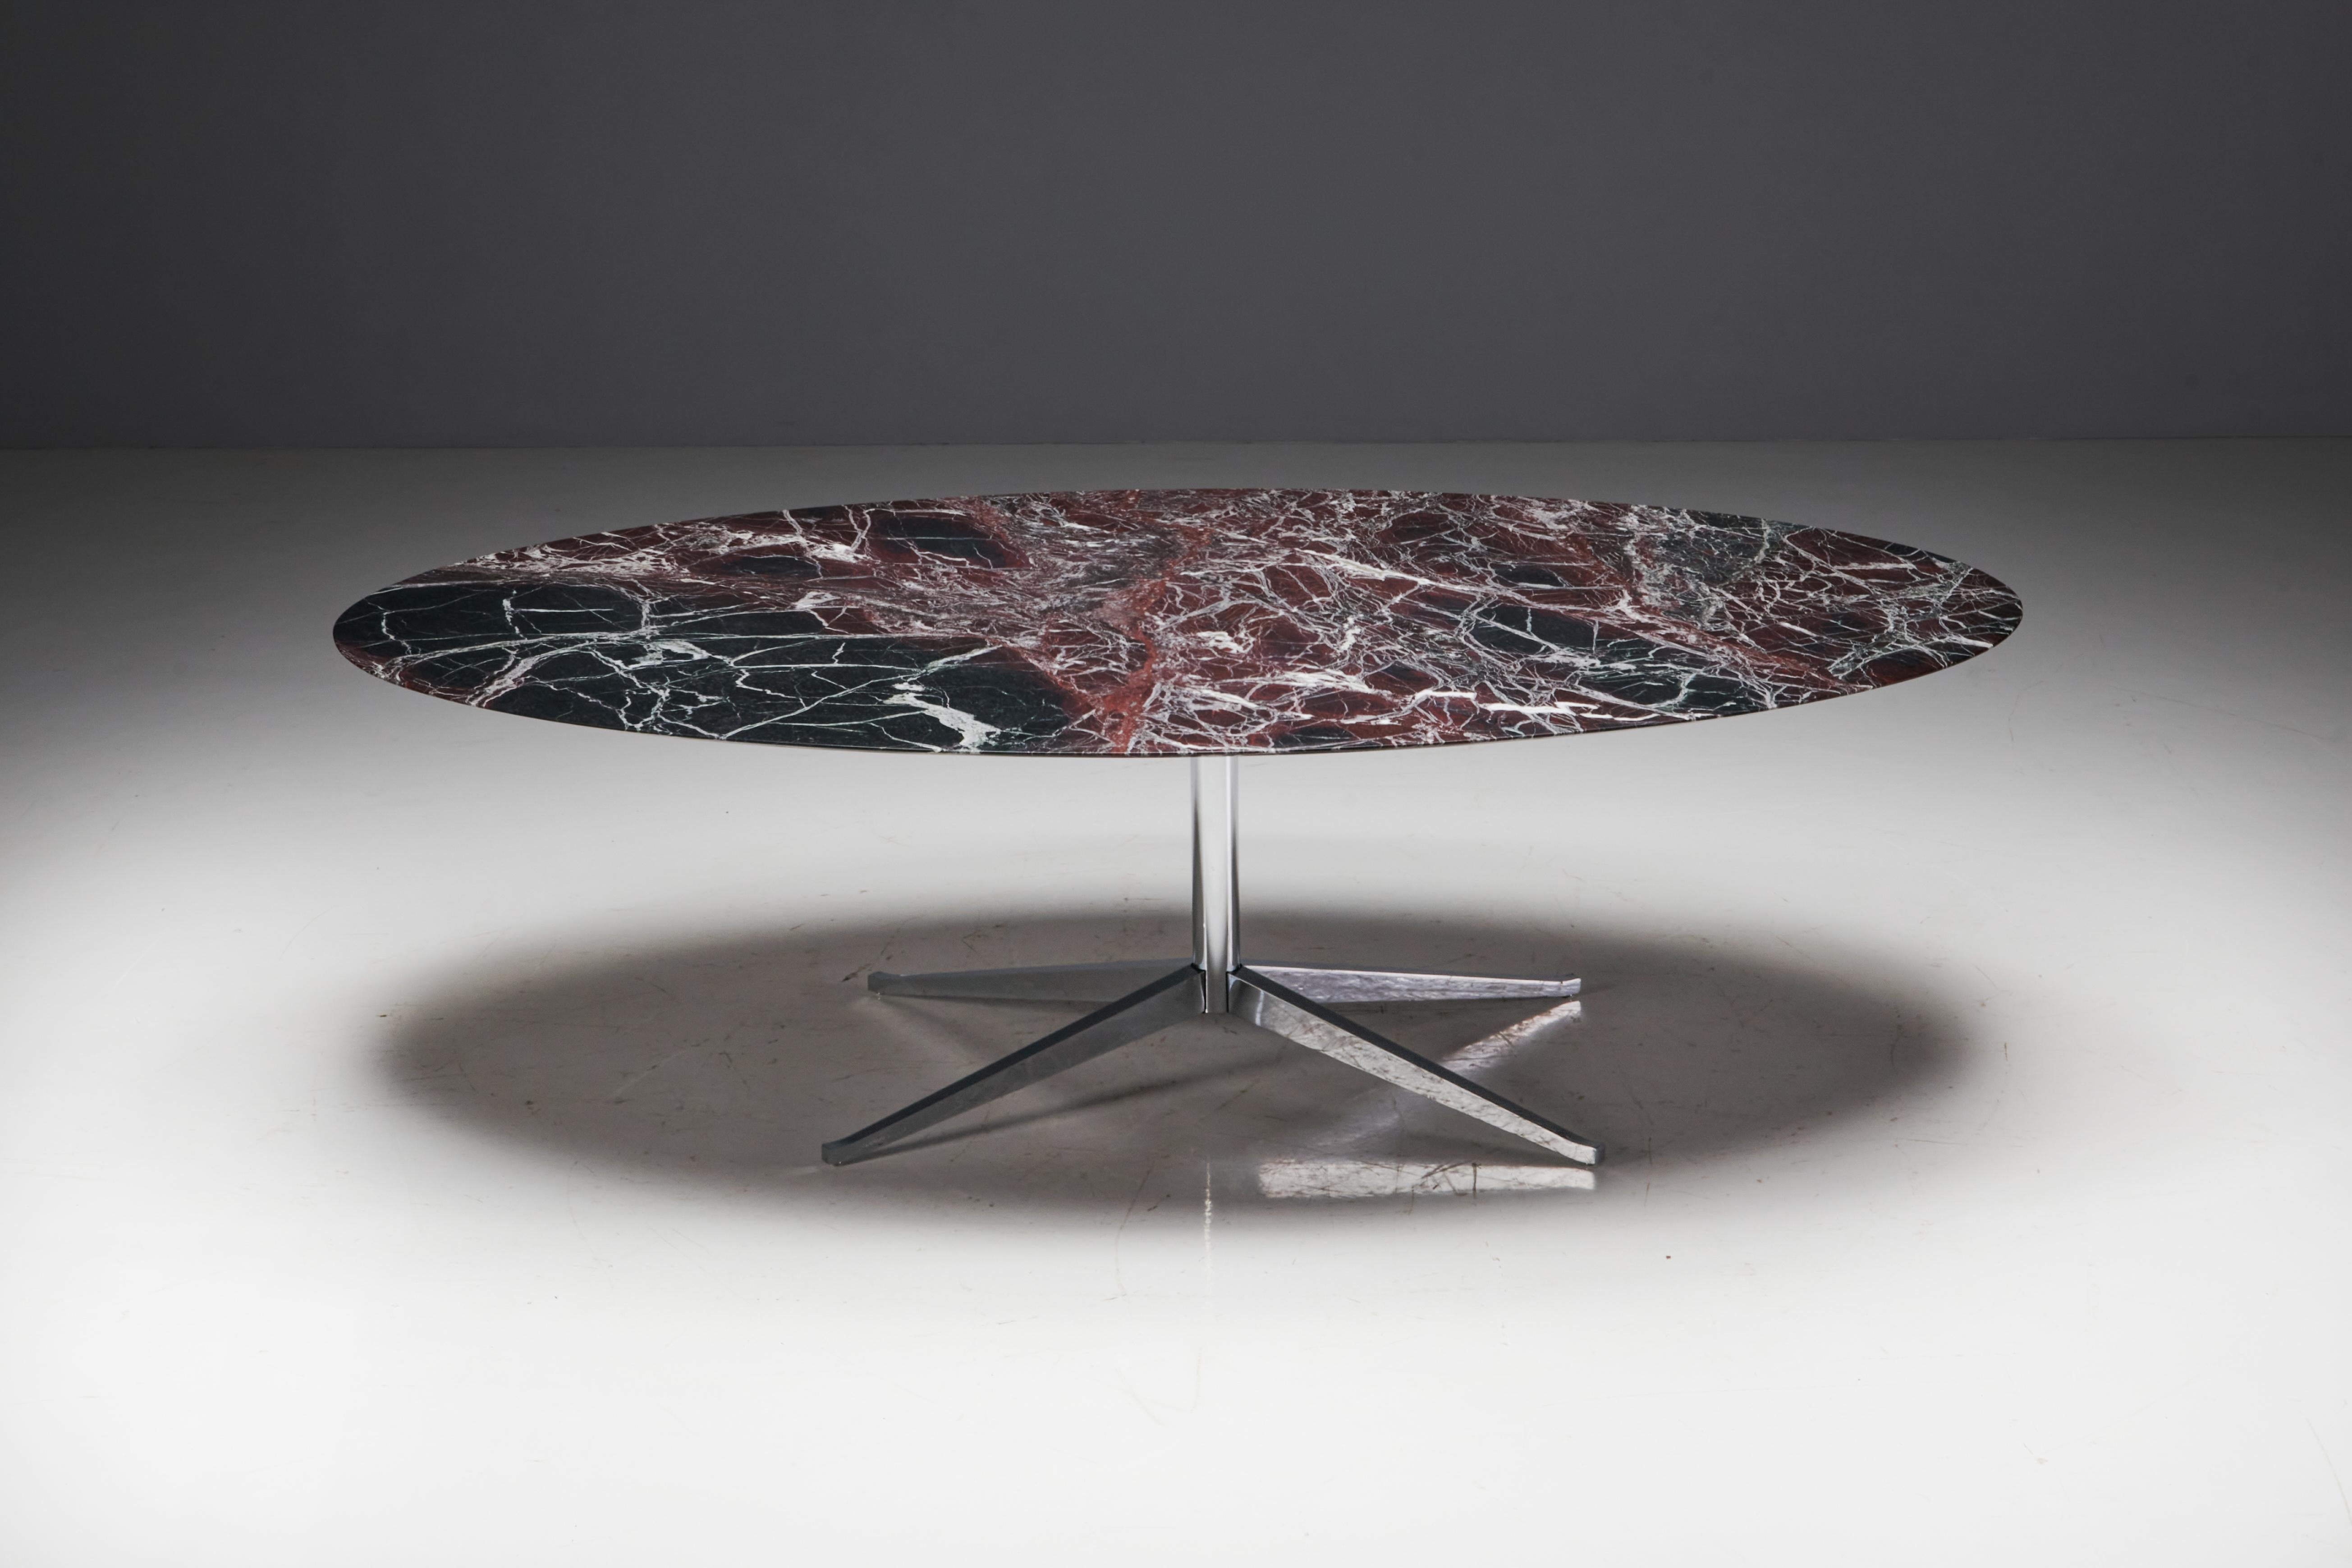 Oval burgundy marble dining table by Florence Knoll, manufactured in the United States during the 1960s. The tabletop, hewn from solid burgundy marble, rests gracefully on a steel base supported by four splayed legs. The marble exhibits exquisite